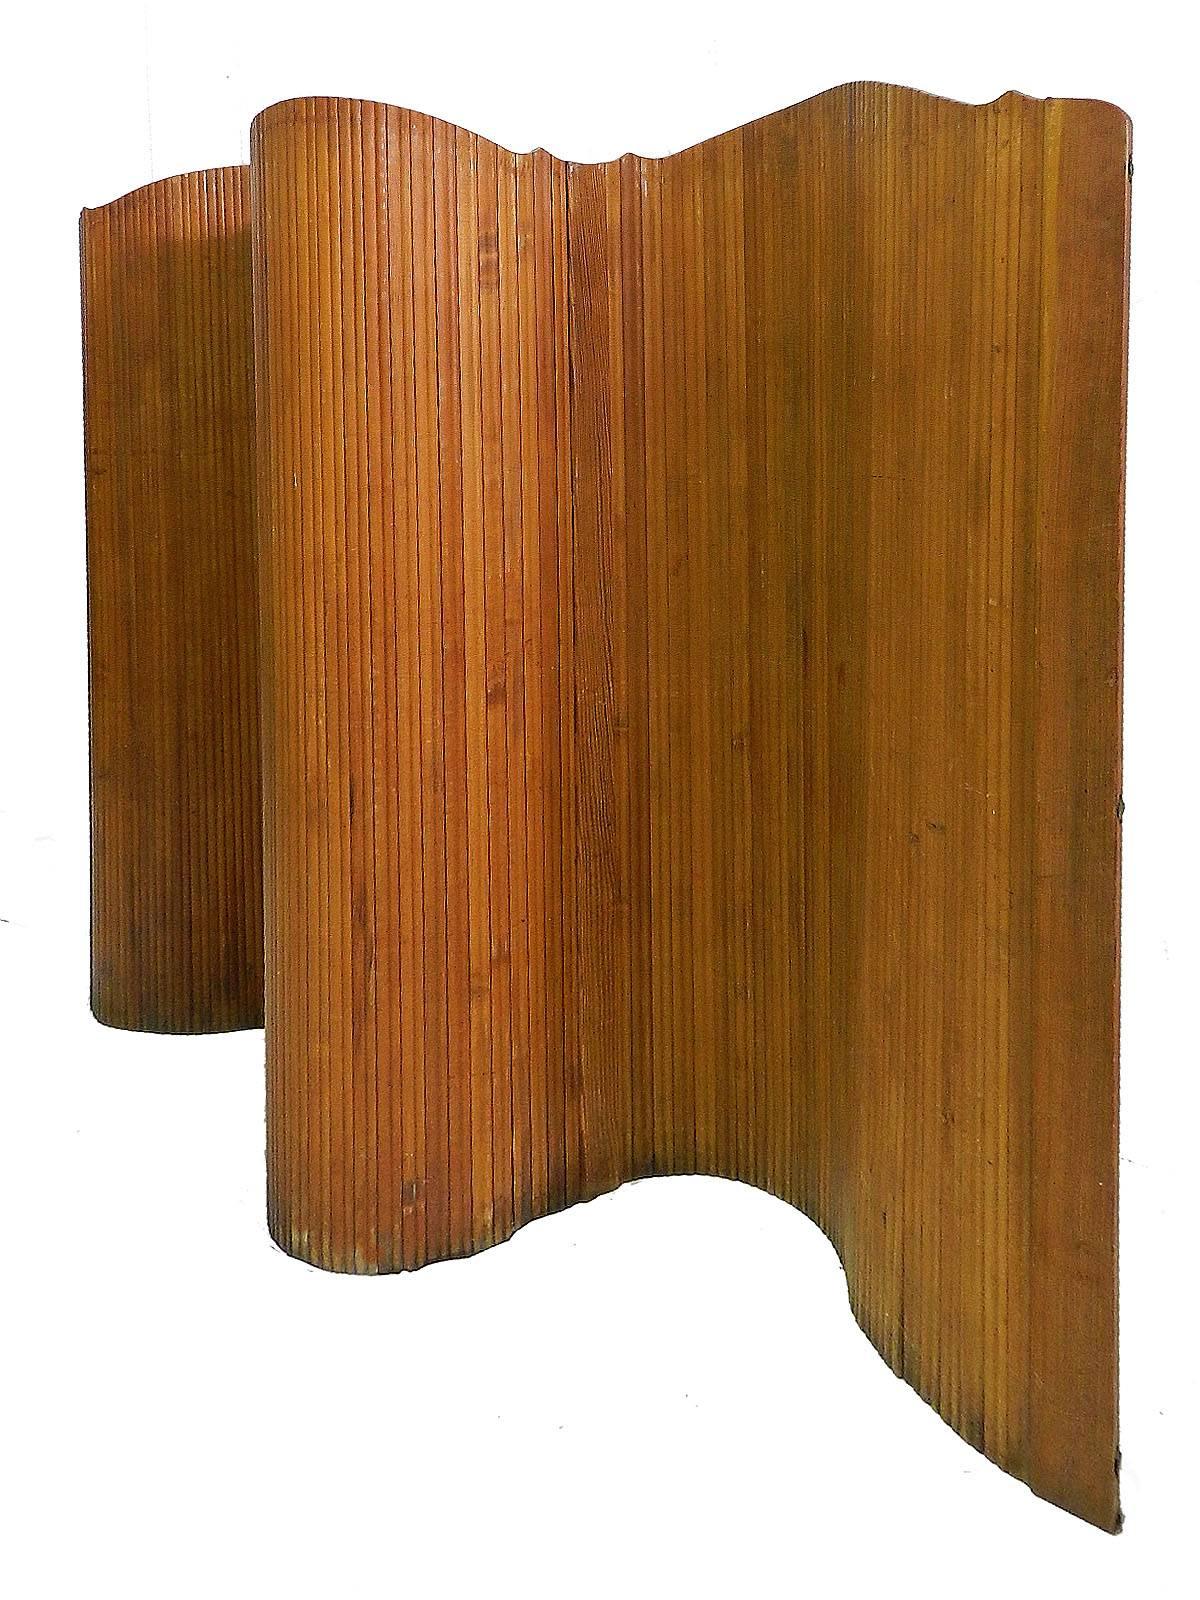 French room divider wood roll up screen by S.N.S.A Midcentury
A firm pitch pine room divider flexible that rolls up neatly
France Art Deco, 1930-1950
Signed with applied brass manufacturer´s labels there are three down each end
Rolls up to 30cms